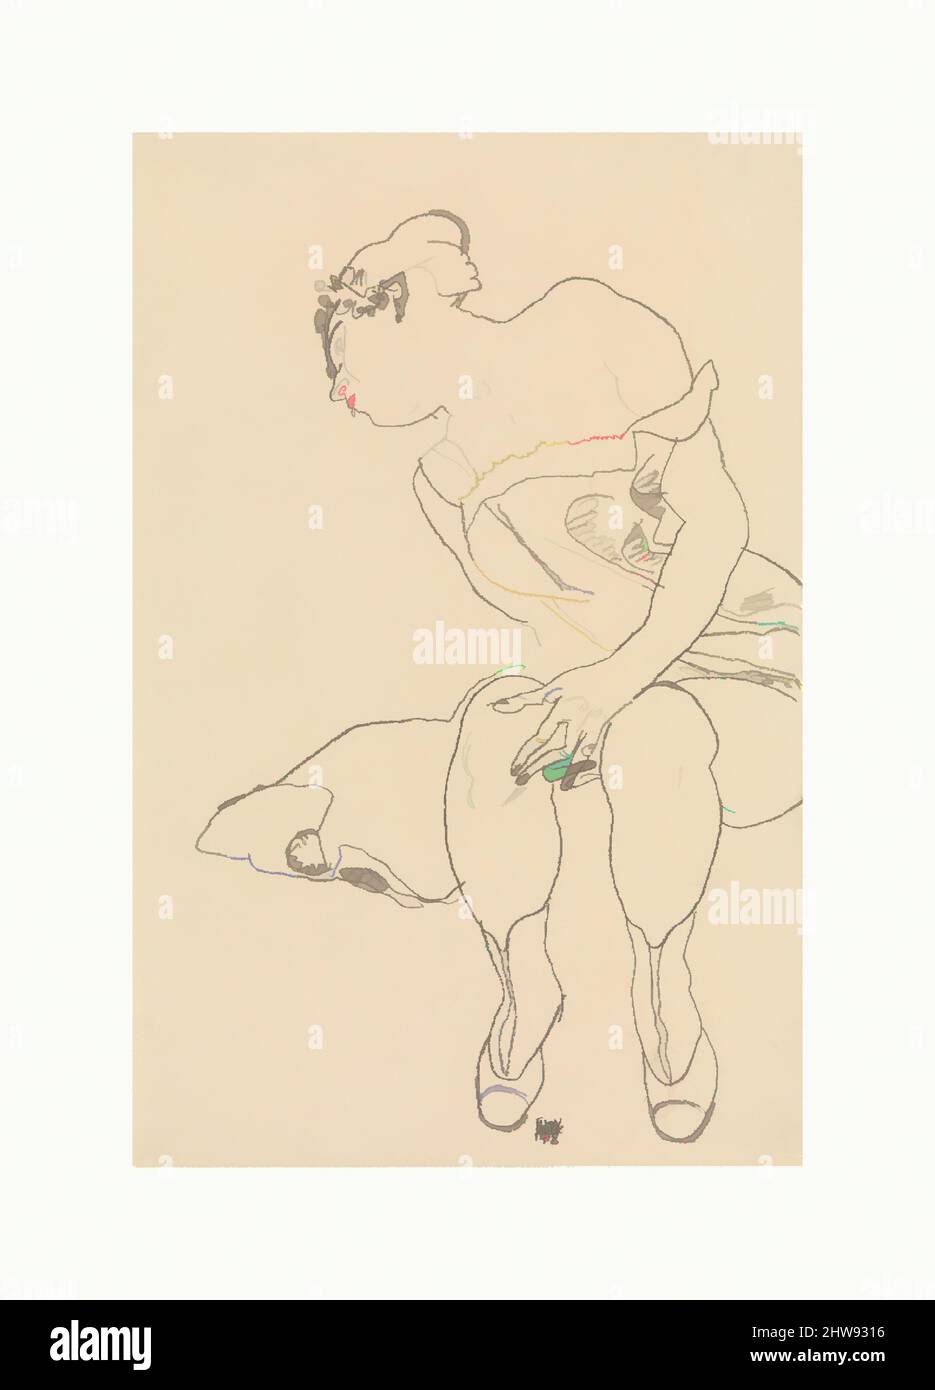 Art inspired by Seated Woman in Corset and Boots, 1918, Crayon on paper, 19 3/4 x 12 7/8 in. (50.2 x 32.7 cm), Drawings, Egon Schiele (Austrian, Tulln 1890–1918 Vienna, Classic works modernized by Artotop with a splash of modernity. Shapes, color and value, eye-catching visual impact on art. Emotions through freedom of artworks in a contemporary way. A timeless message pursuing a wildly creative new direction. Artists turning to the digital medium and creating the Artotop NFT Stock Photo